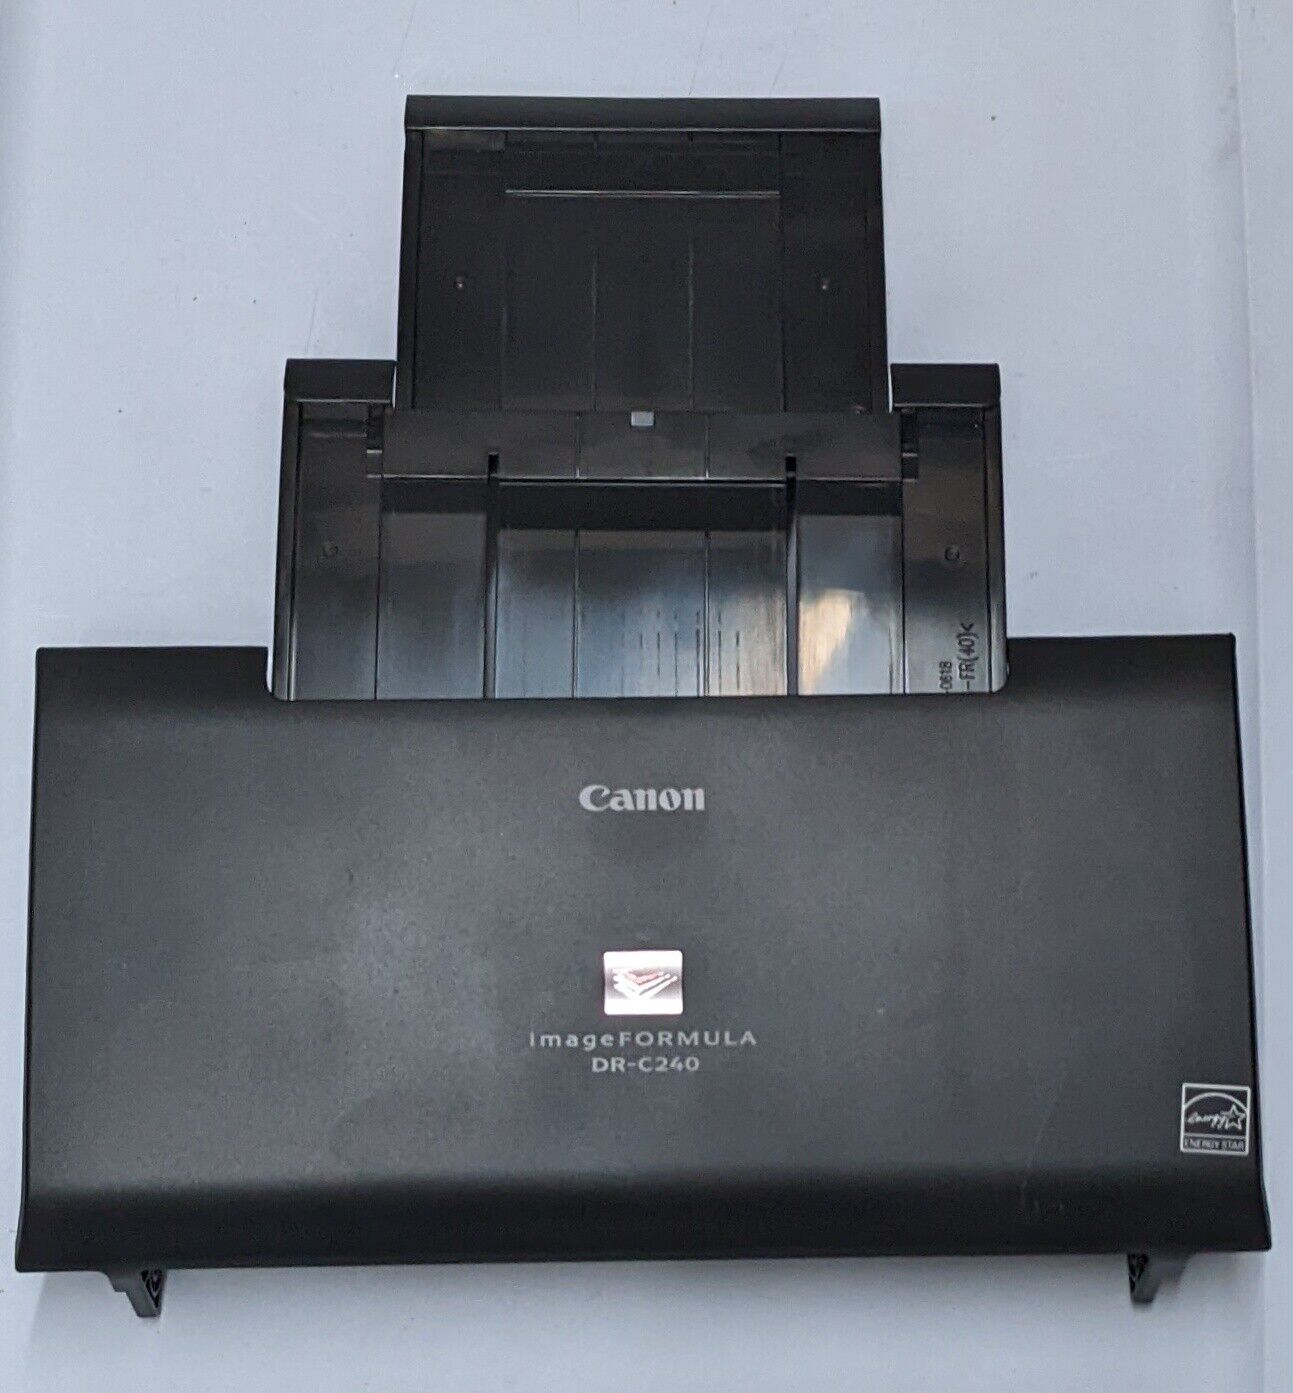 Original High quality Document Eject Tray for DR-C240 Offi Canon imageFormula Import